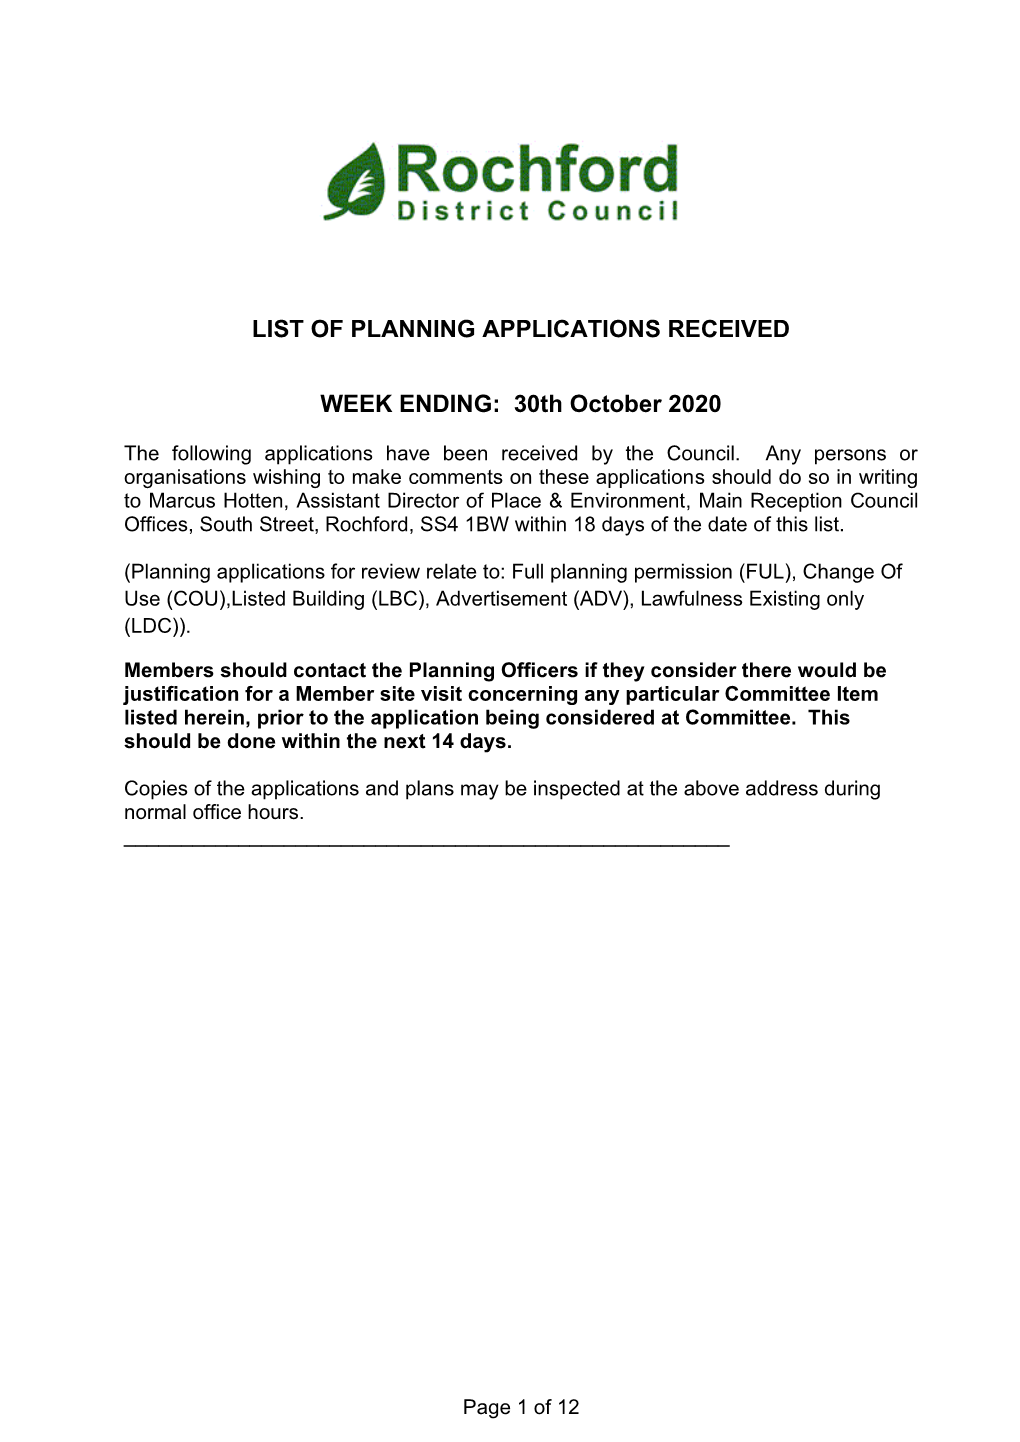 Weekly Parish List of Planning Applications